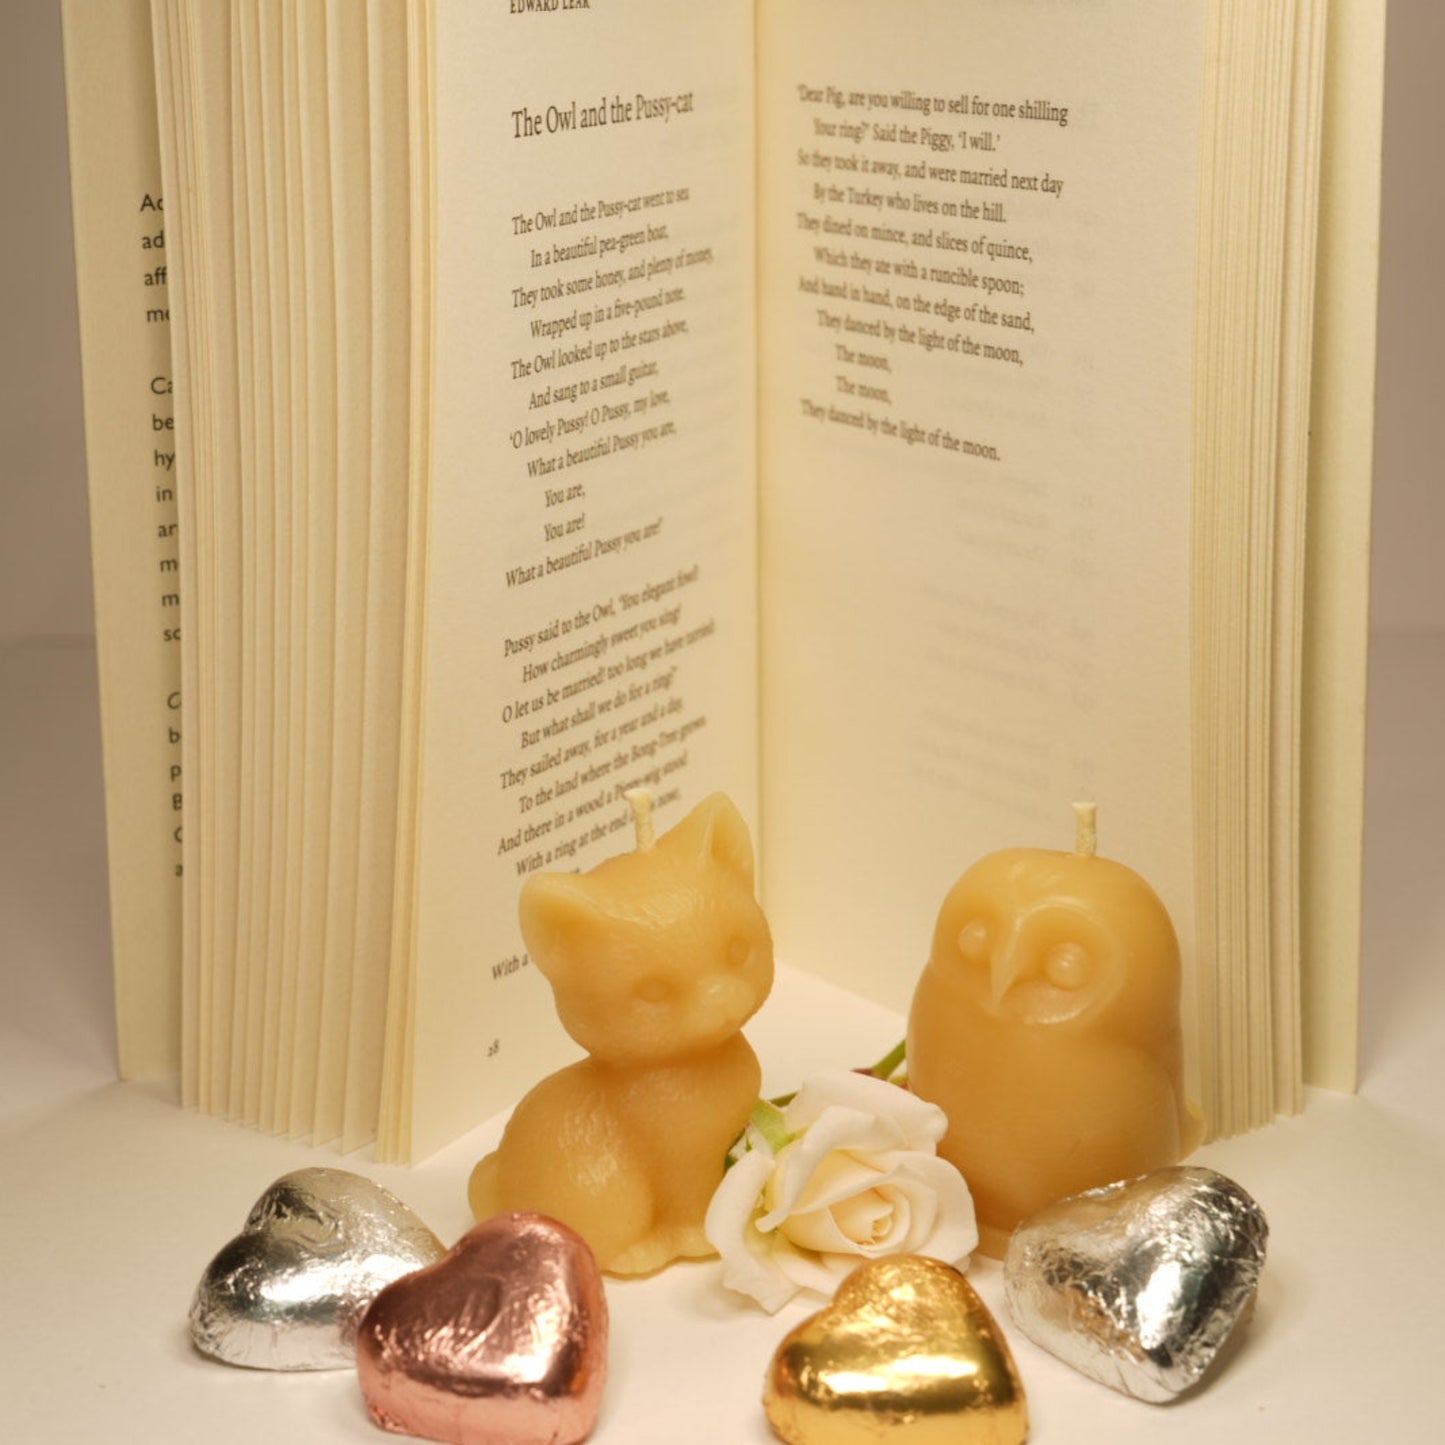 Owl and the Pussy-cat beeswax candles with Poem book